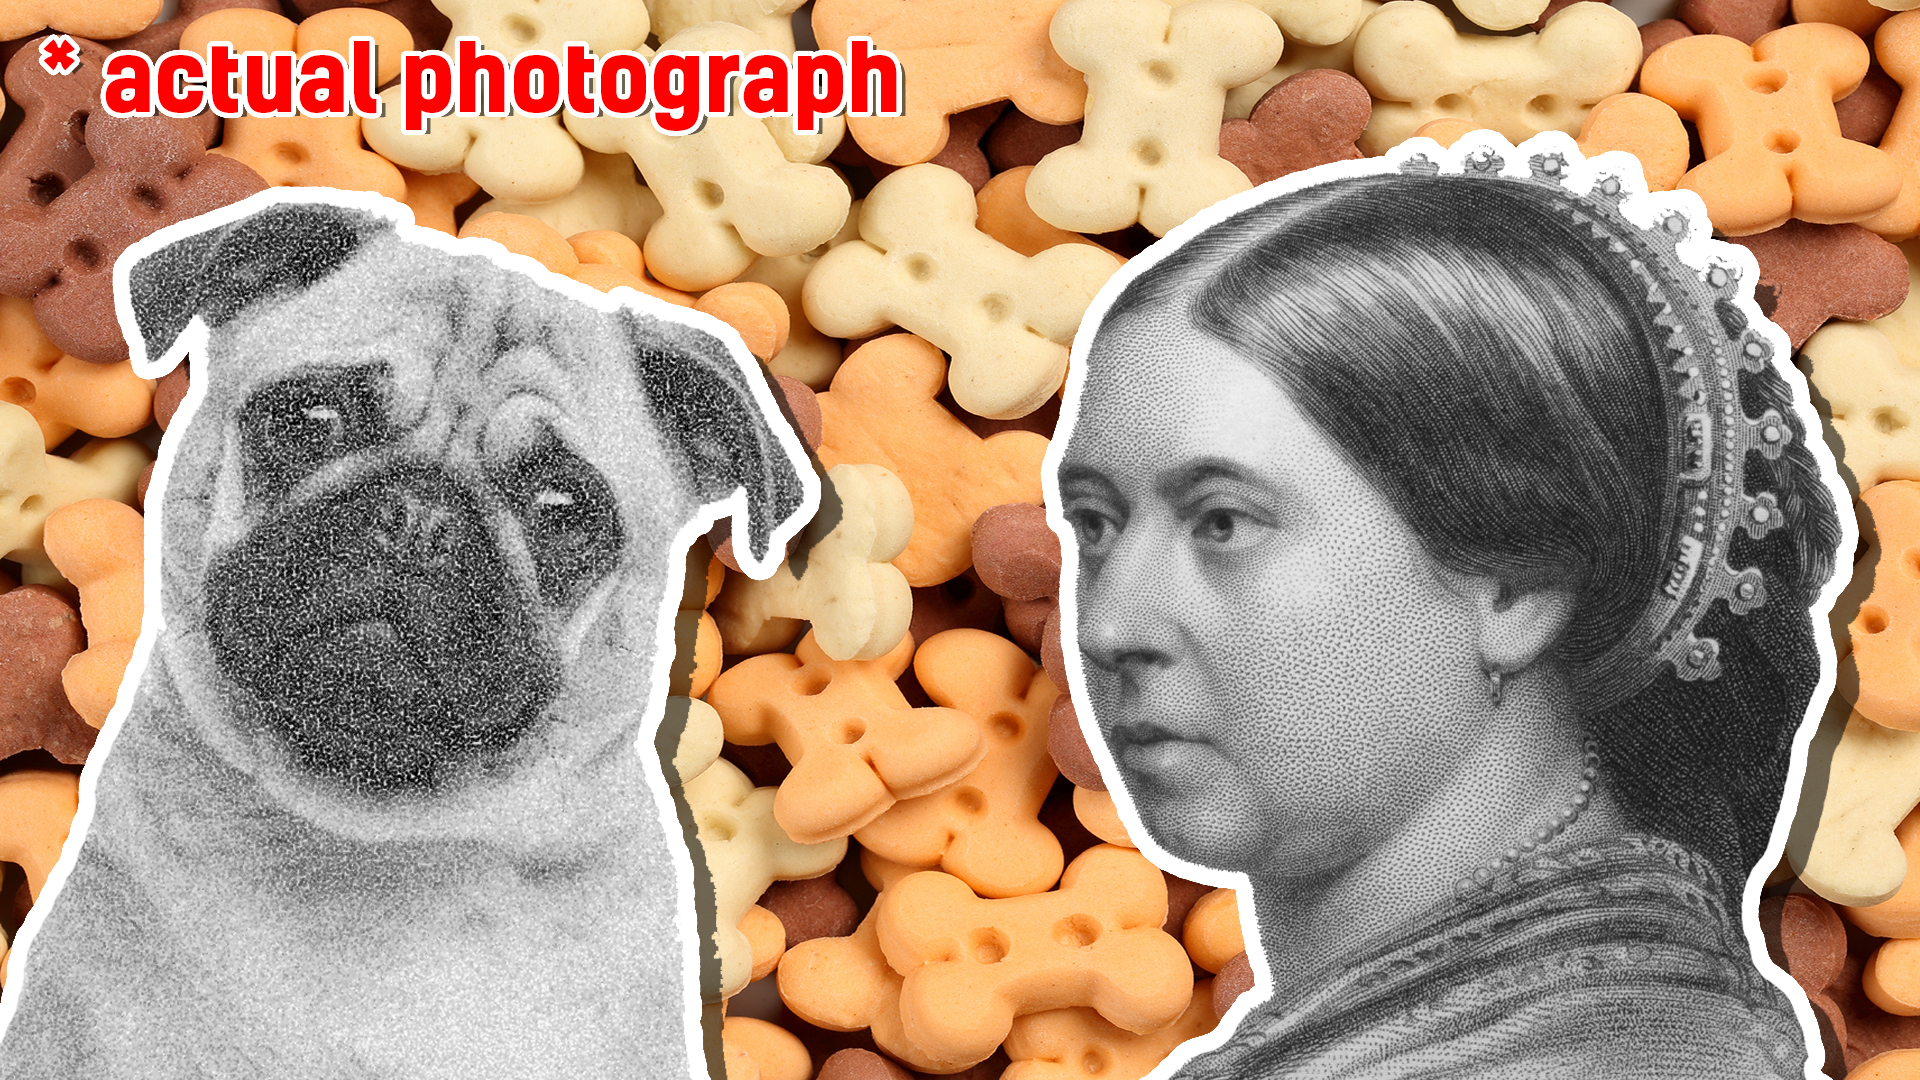 Queen Victoria and a pug